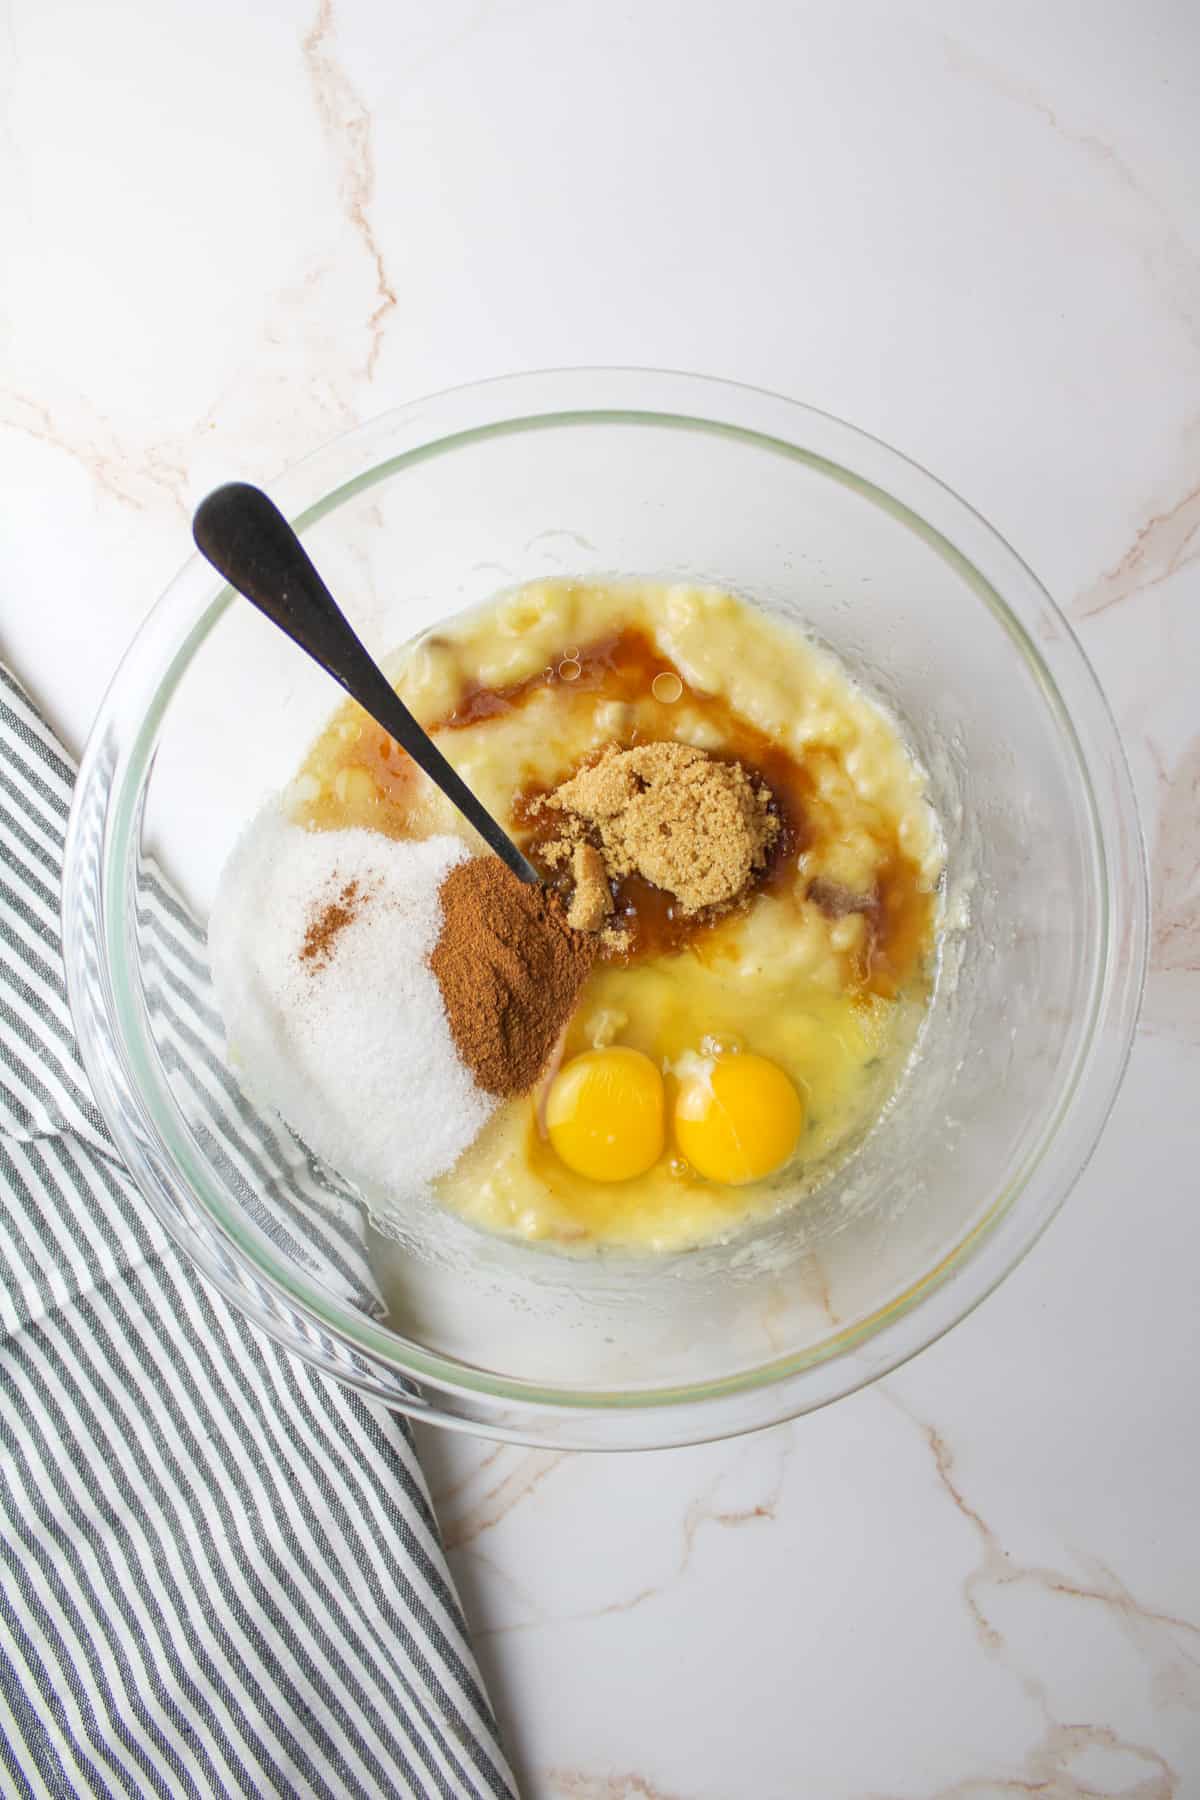 mashed banana with sugars and eggs and oil in a bowl with a fork